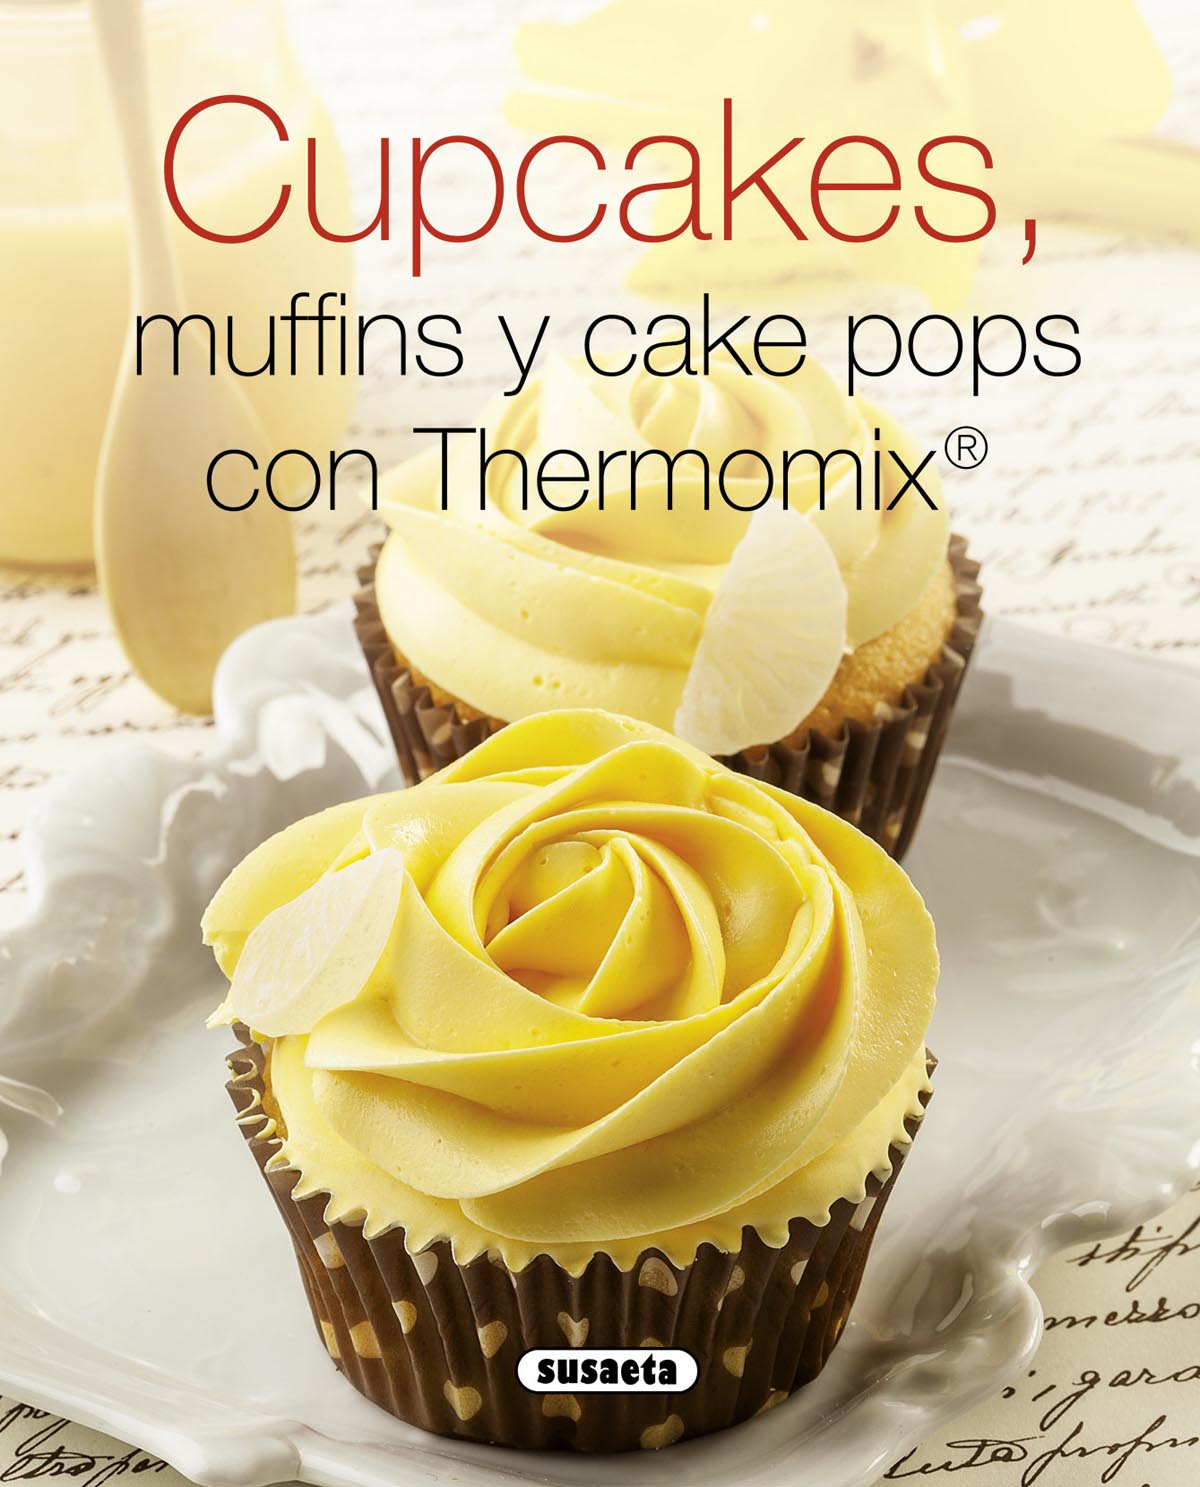 Cupcakes, muffins y cake pops con Thermomix